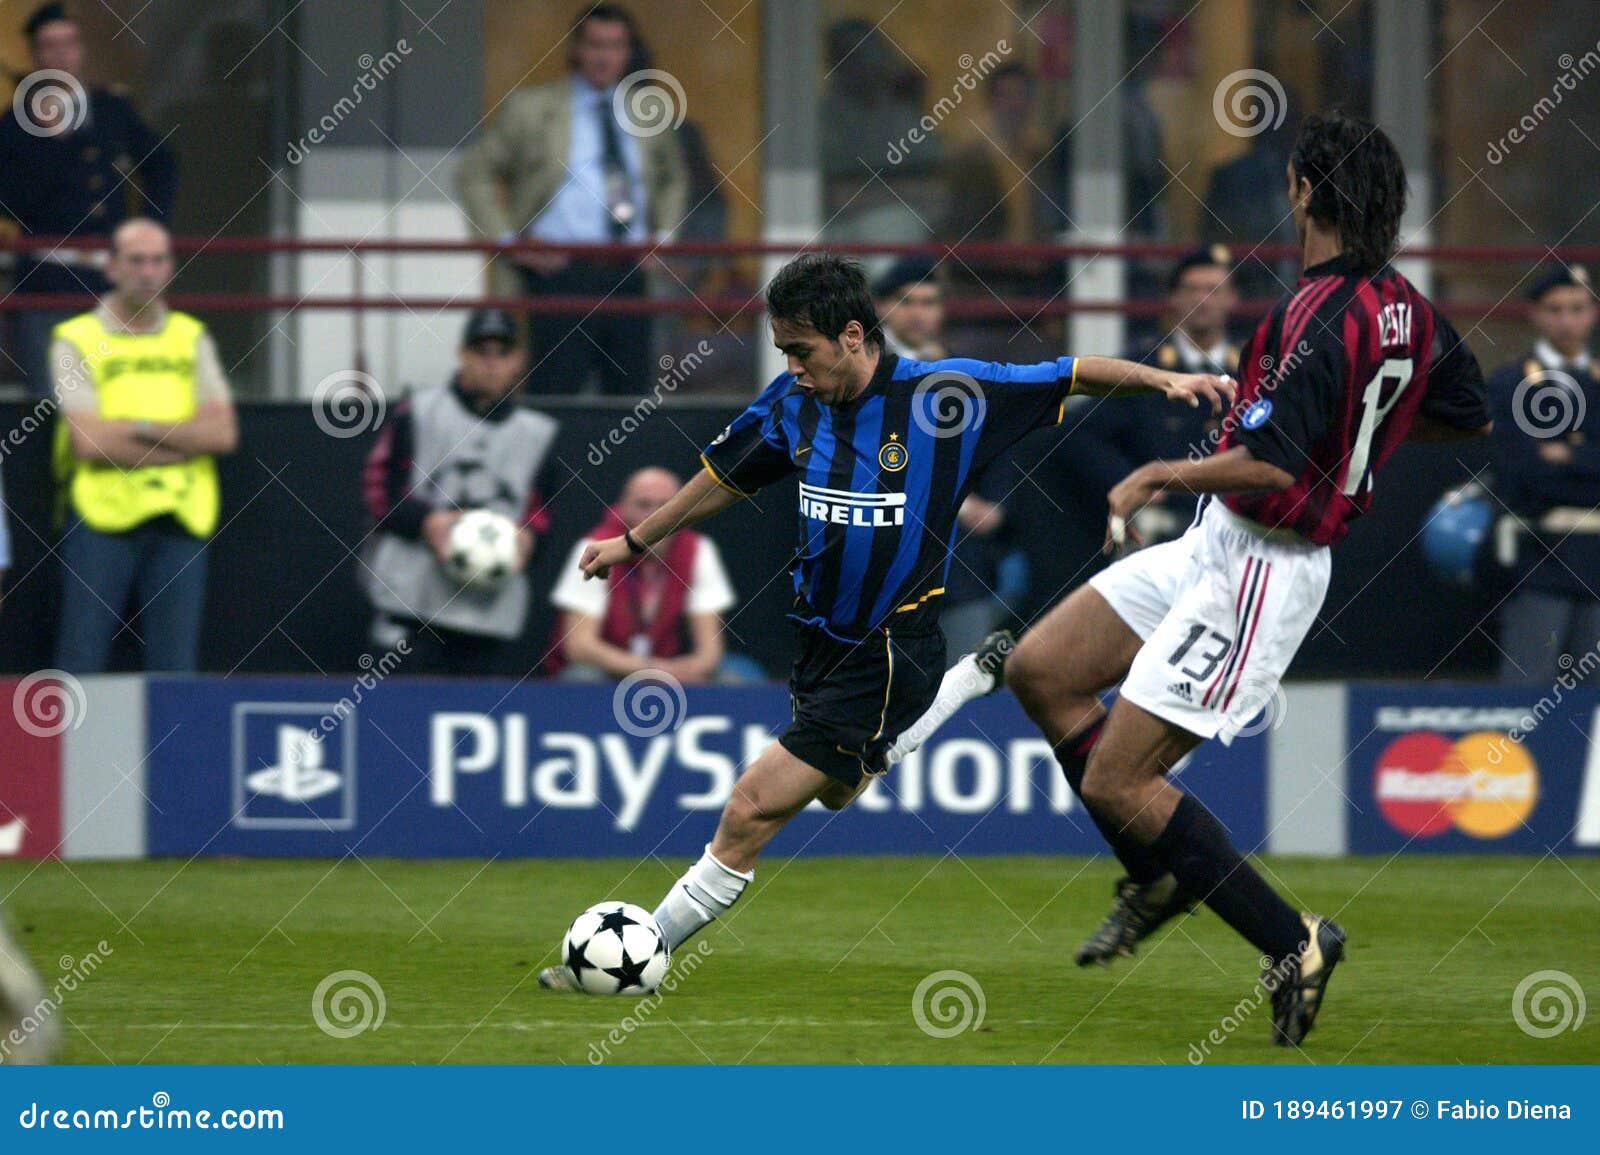 Alvaro Recoba in Action during the Match Editorial Photography - Image of  league, playing: 189461997